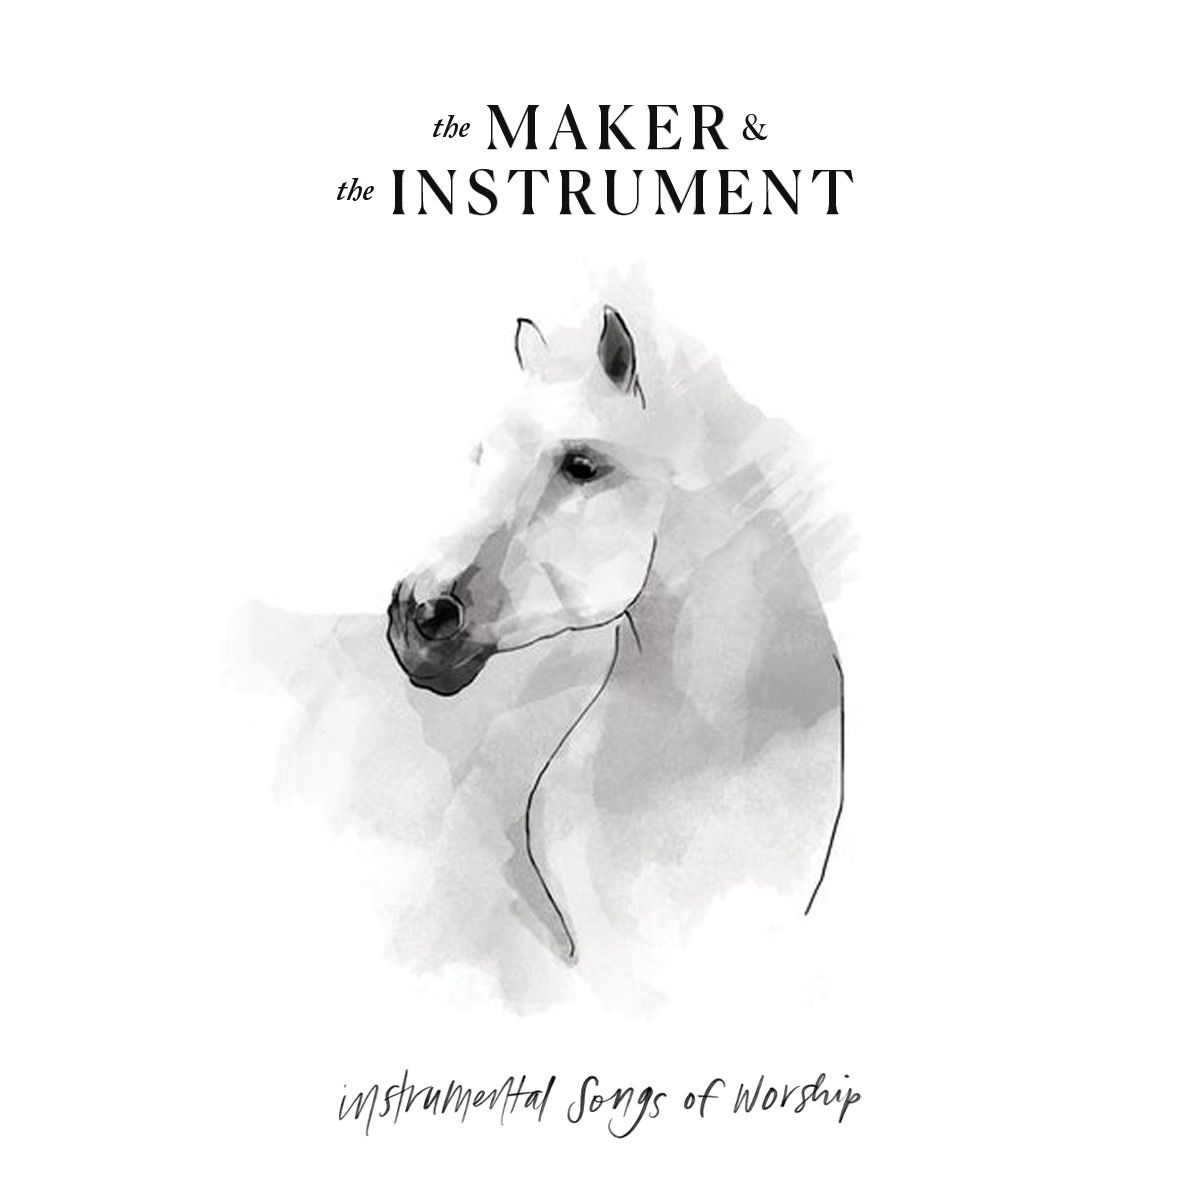 The Maker & The Instrument releases “Instrumental Songs of Worship